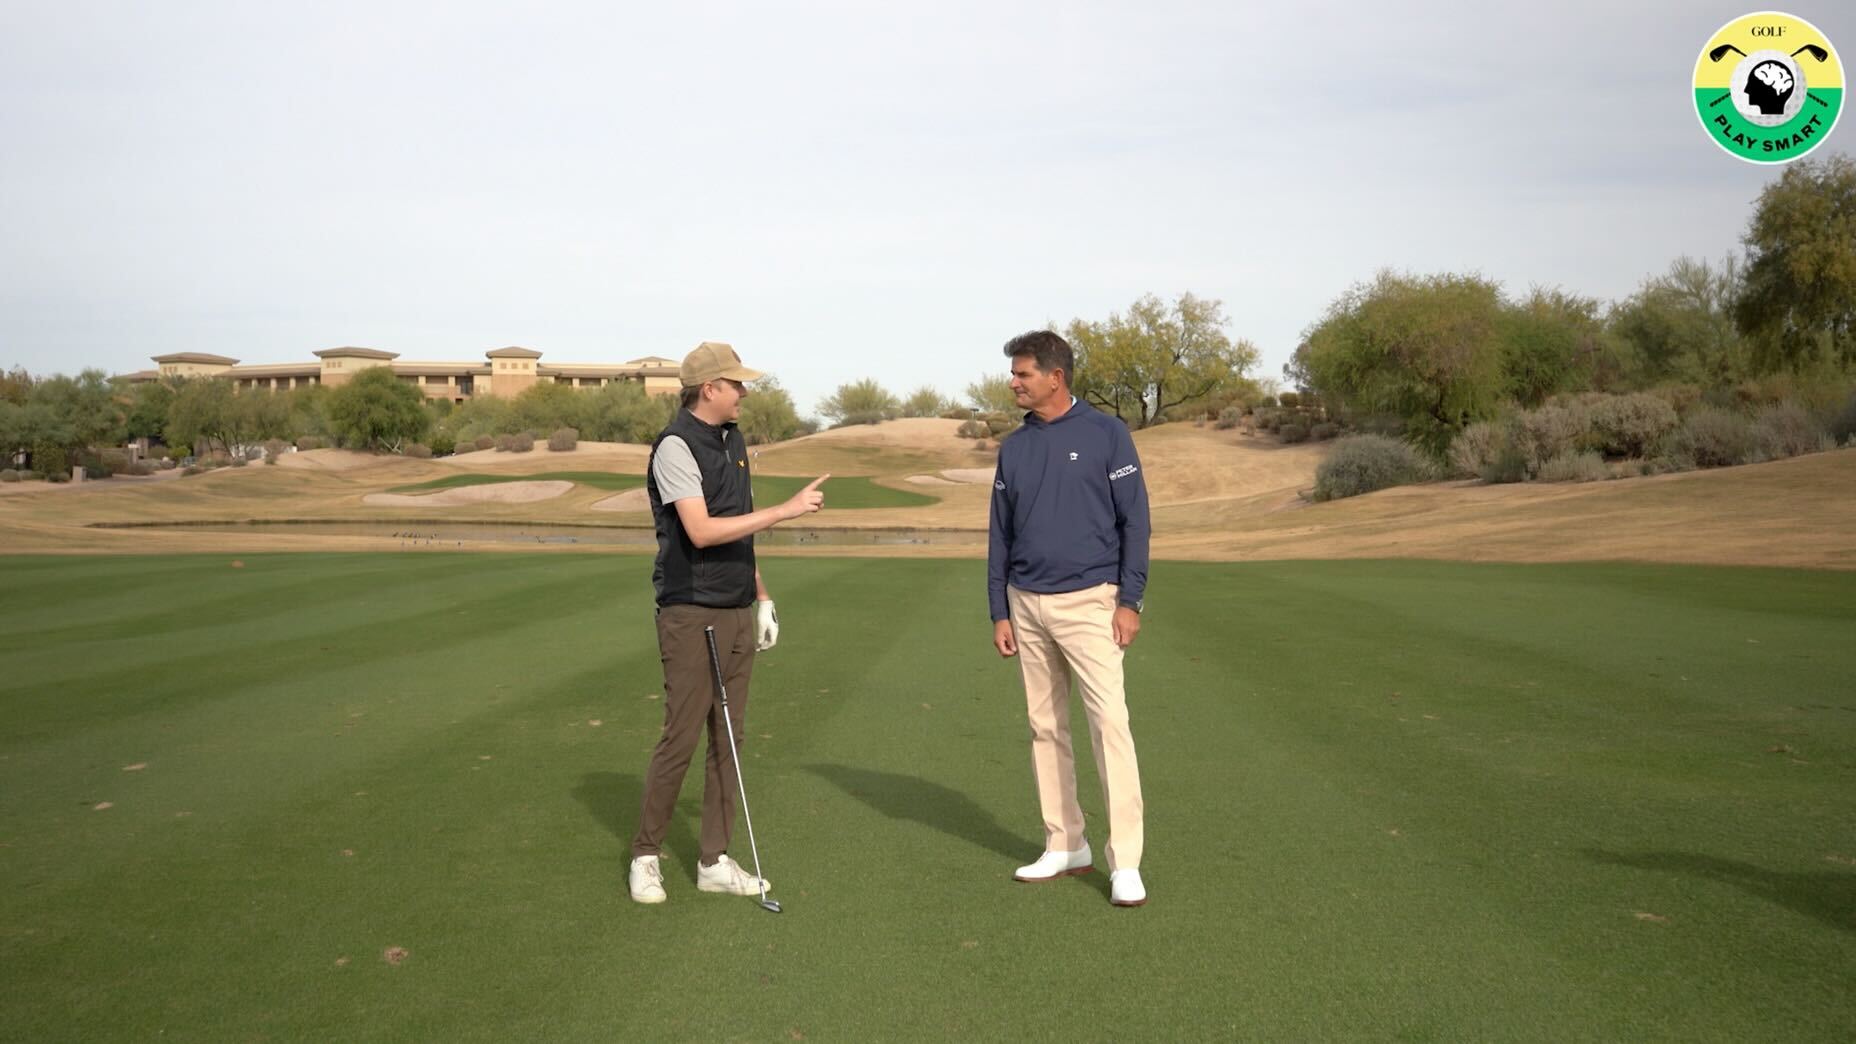 GOLF editor zephyr melton talks with jason baile standing in the middle of a fairway